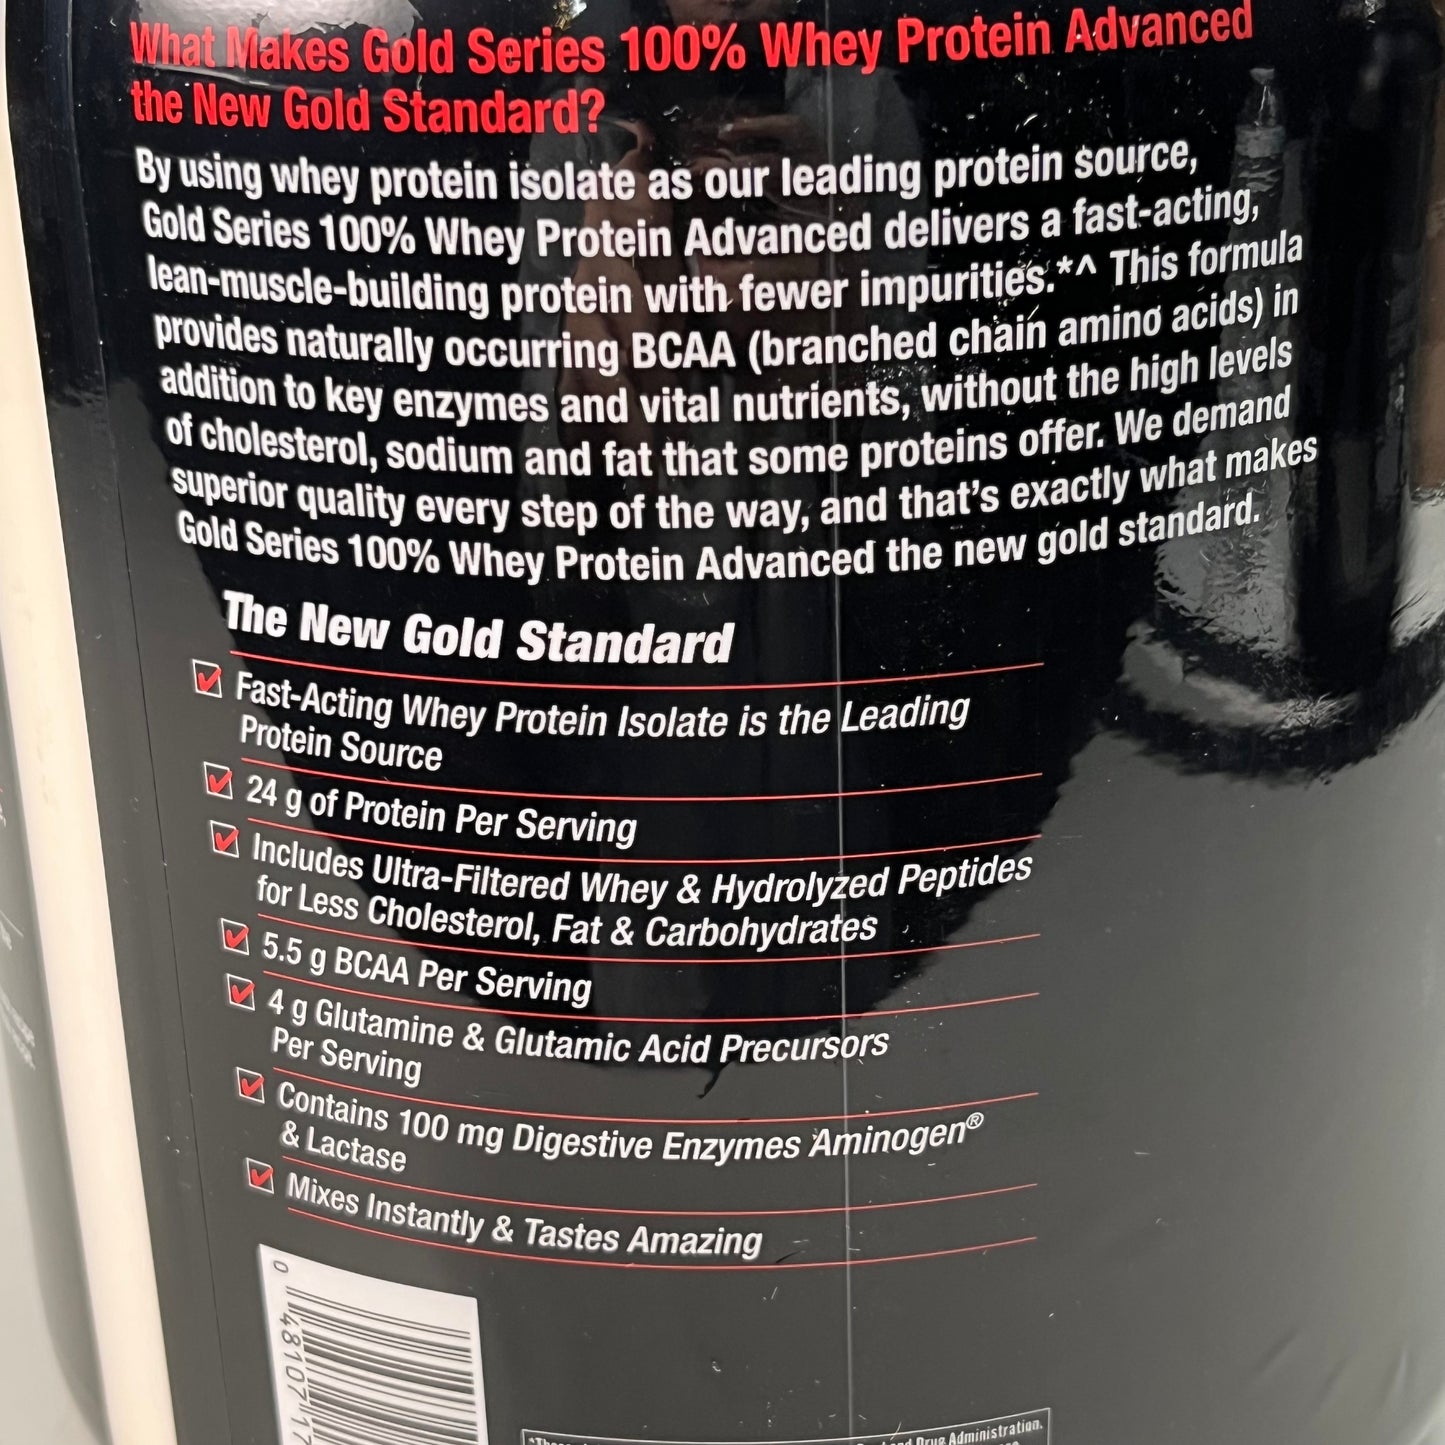 GNC Pro Performance Gold Series 100% Whey Protein Delicious Strawberry 79.10 oz. 2242.5g (New)